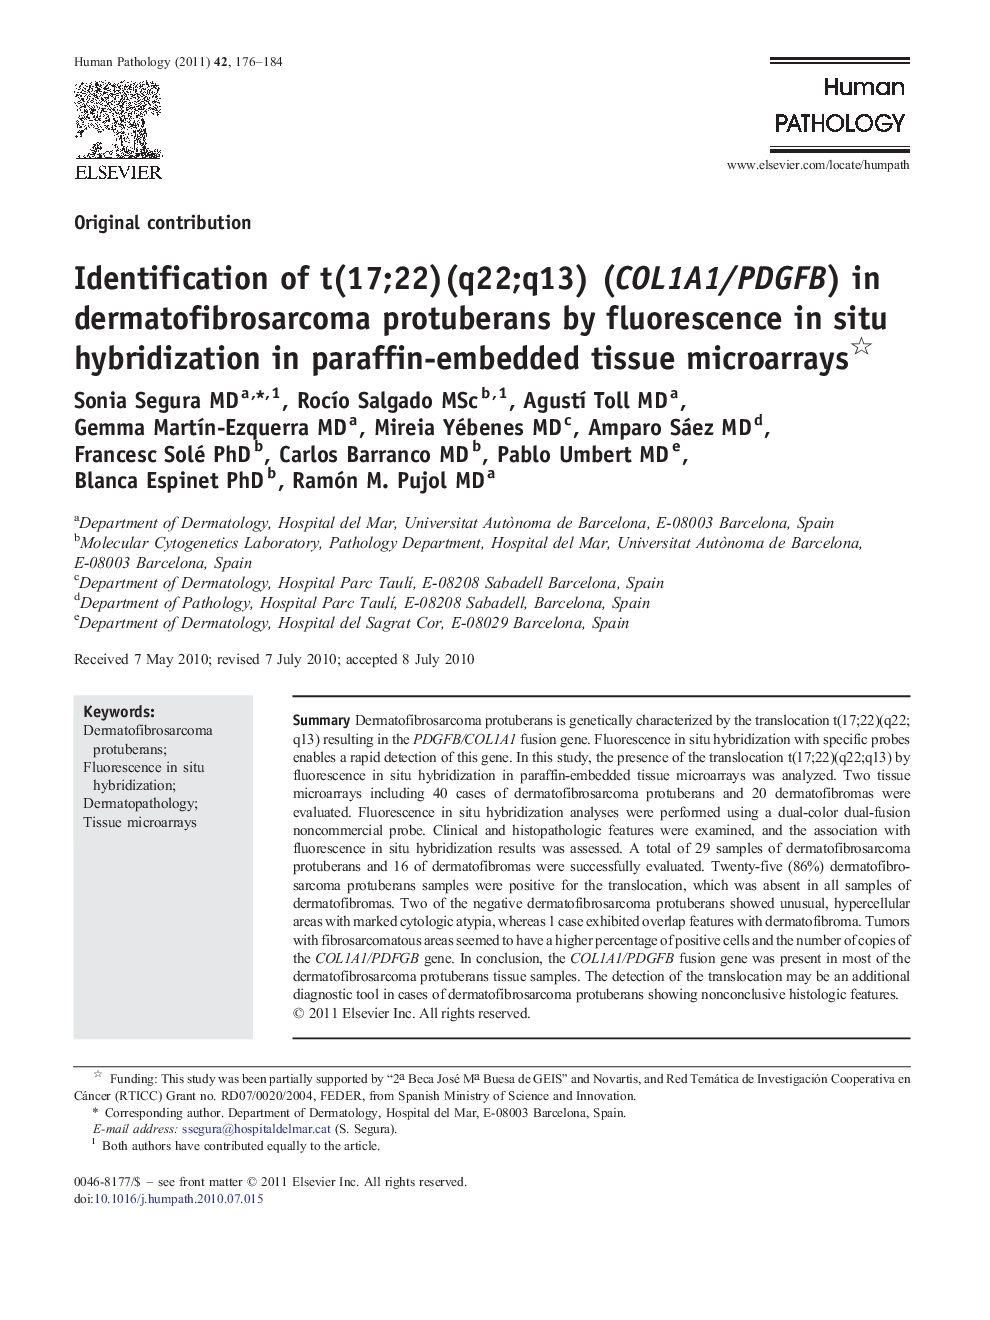 Identification of t(17;22)(q22;q13) (COL1A1/PDGFB) in dermatofibrosarcoma protuberans by fluorescence in situ hybridization in paraffin-embedded tissue microarrays 